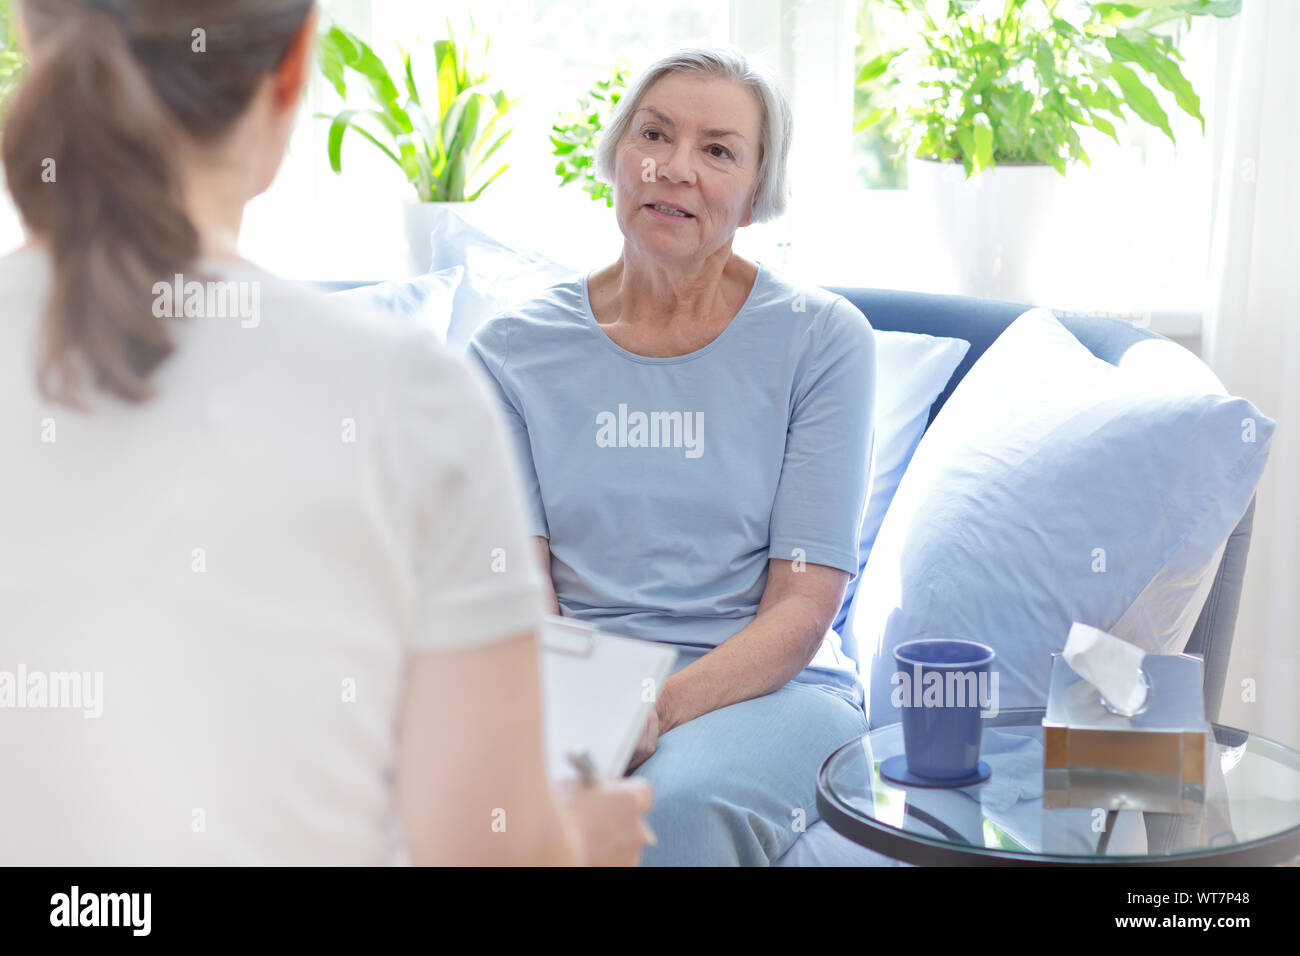 Talk therapy concept: female doctor talking with her senior patient about her problems during a counseling session. Stock Photo